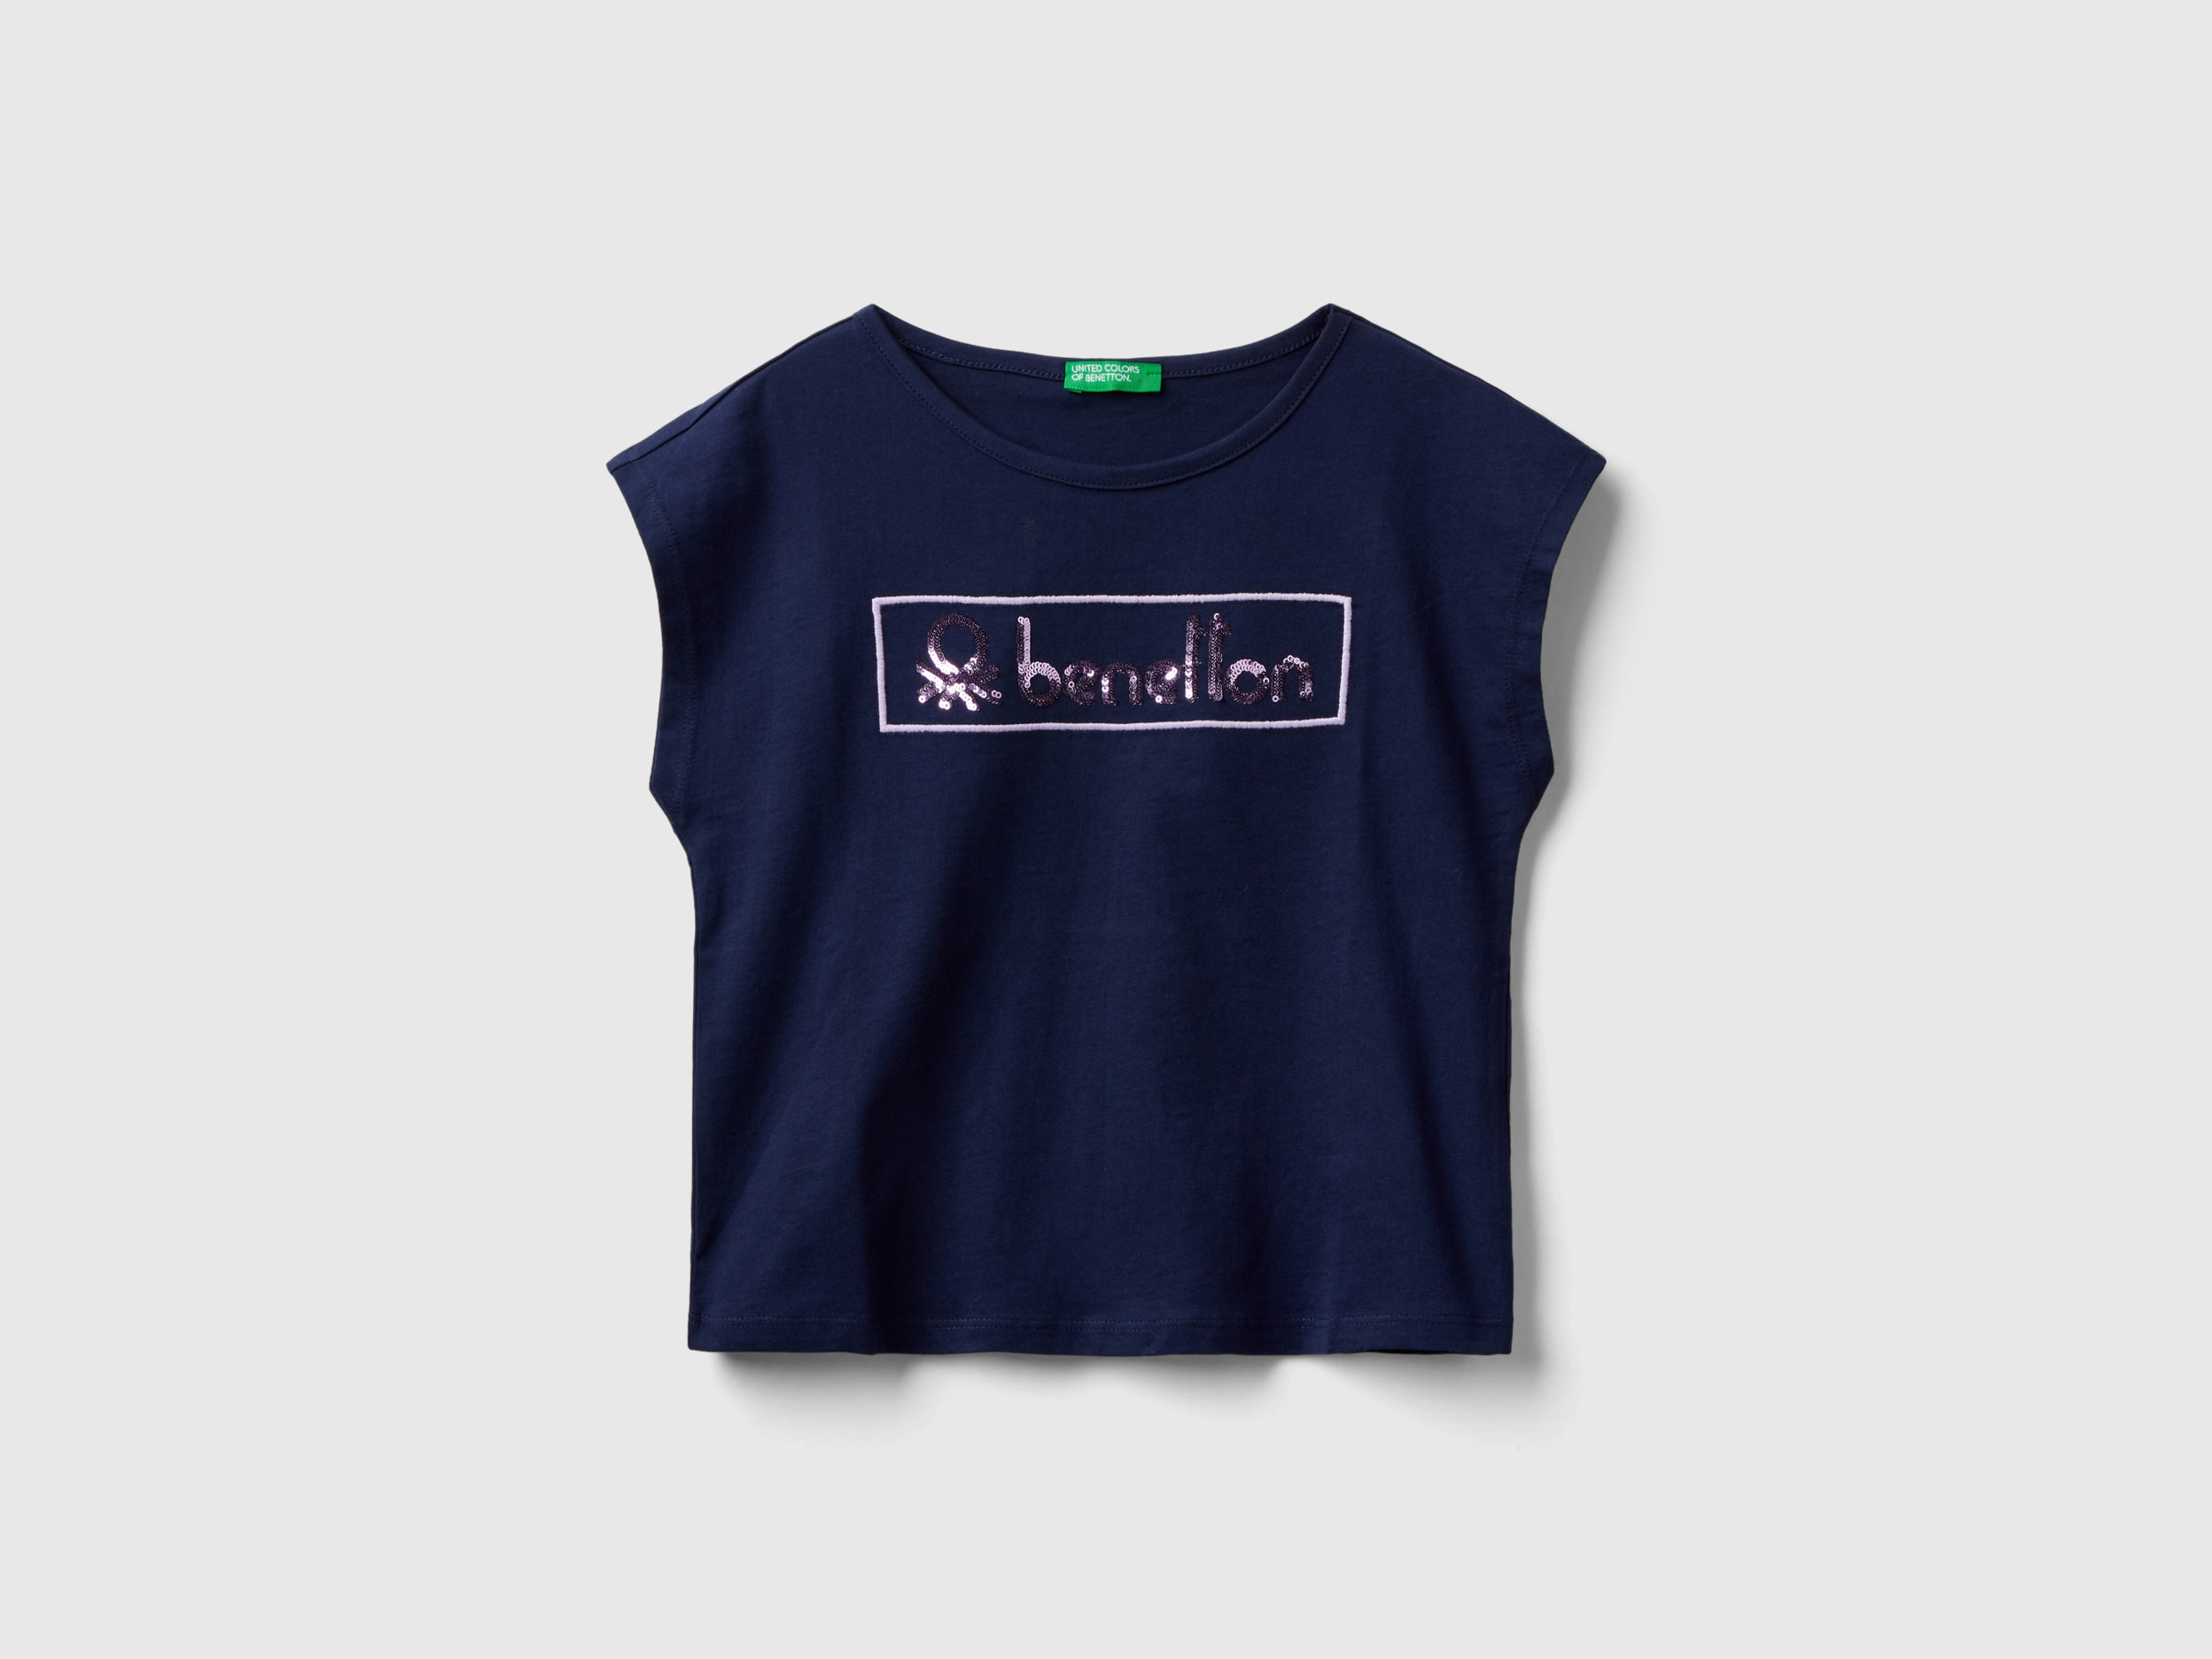 Image of Benetton, T-shirt With Sequins, size M, Dark Blue, Kids